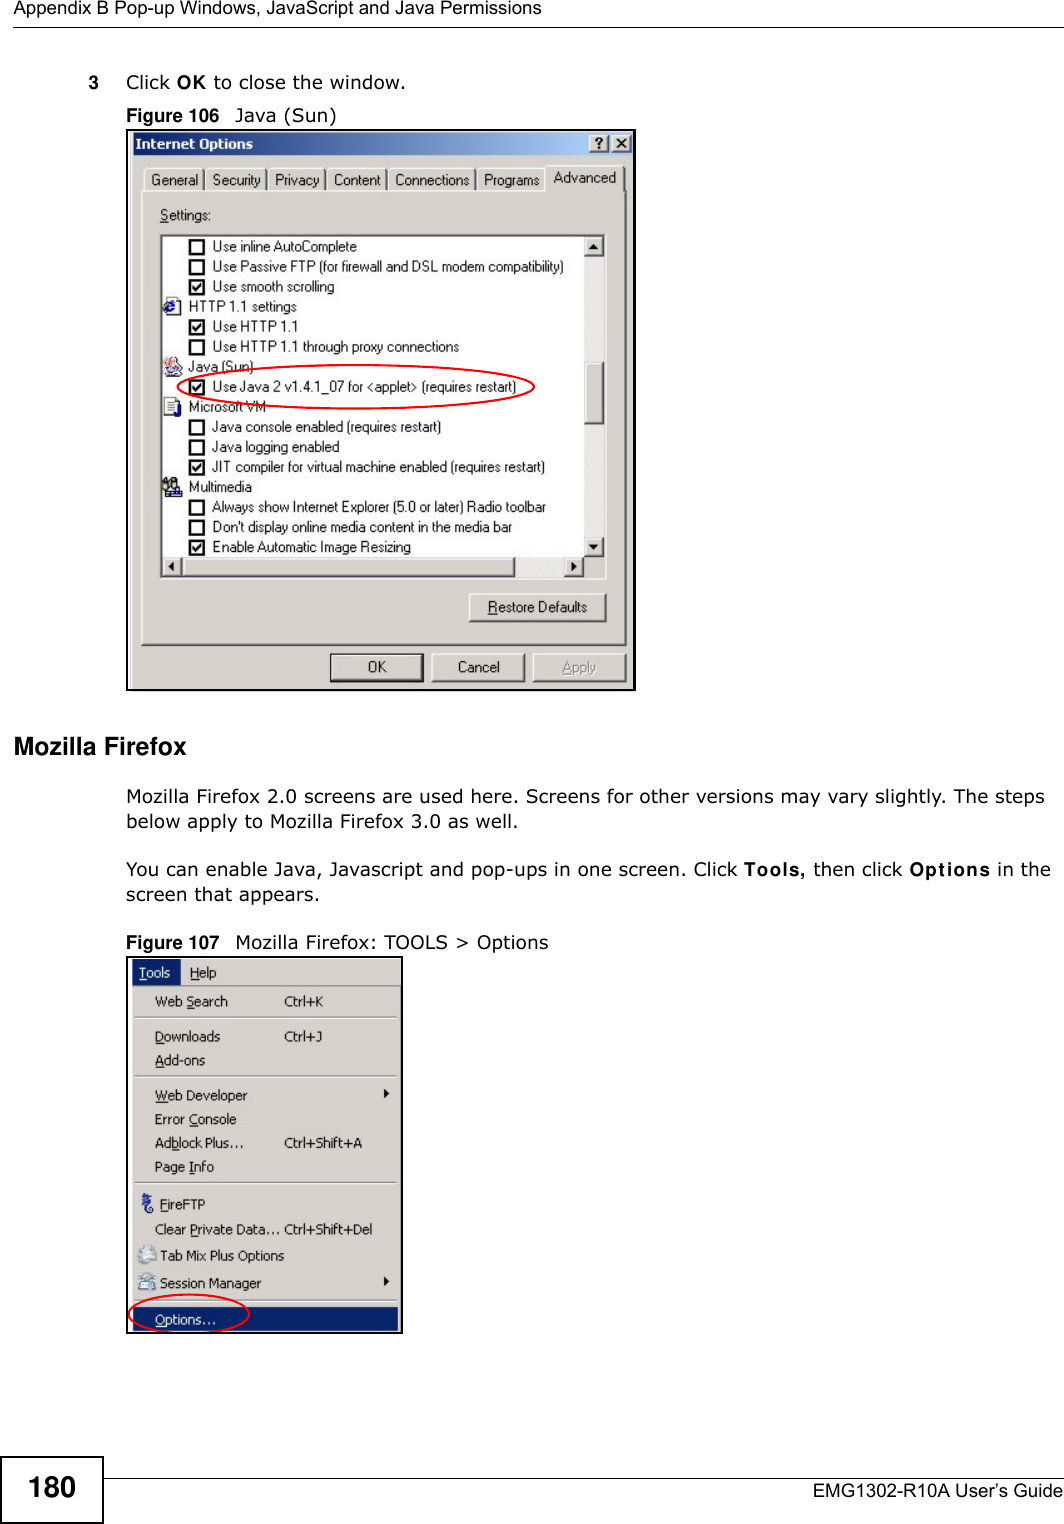 Appendix B Pop-up Windows, JavaScript and Java PermissionsEMG1302-R10A User’s Guide1803Click OK to close the window.Figure 106   Java (Sun)Mozilla FirefoxMozilla Firefox 2.0 screens are used here. Screens for other versions may vary slightly. The steps below apply to Mozilla Firefox 3.0 as well.You can enable Java, Javascript and pop-ups in one screen. Click Tools, then click Options in the screen that appears.Figure 107   Mozilla Firefox: TOOLS &gt; Options